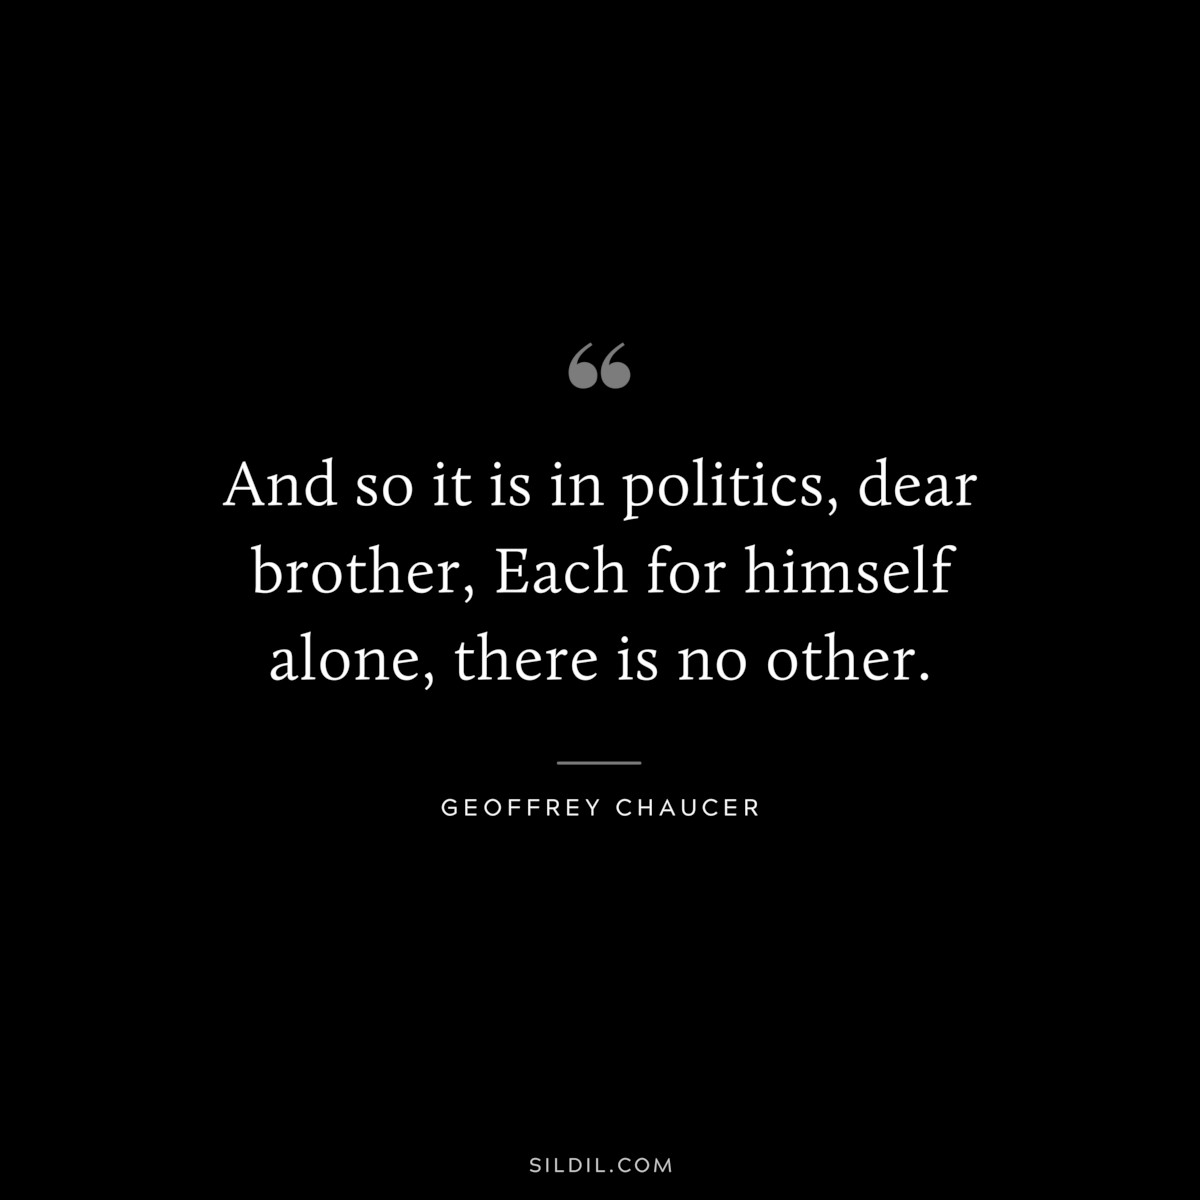 And so it is in politics, dear brother, Each for himself alone, there is no other. ― Geoffrey Chaucer